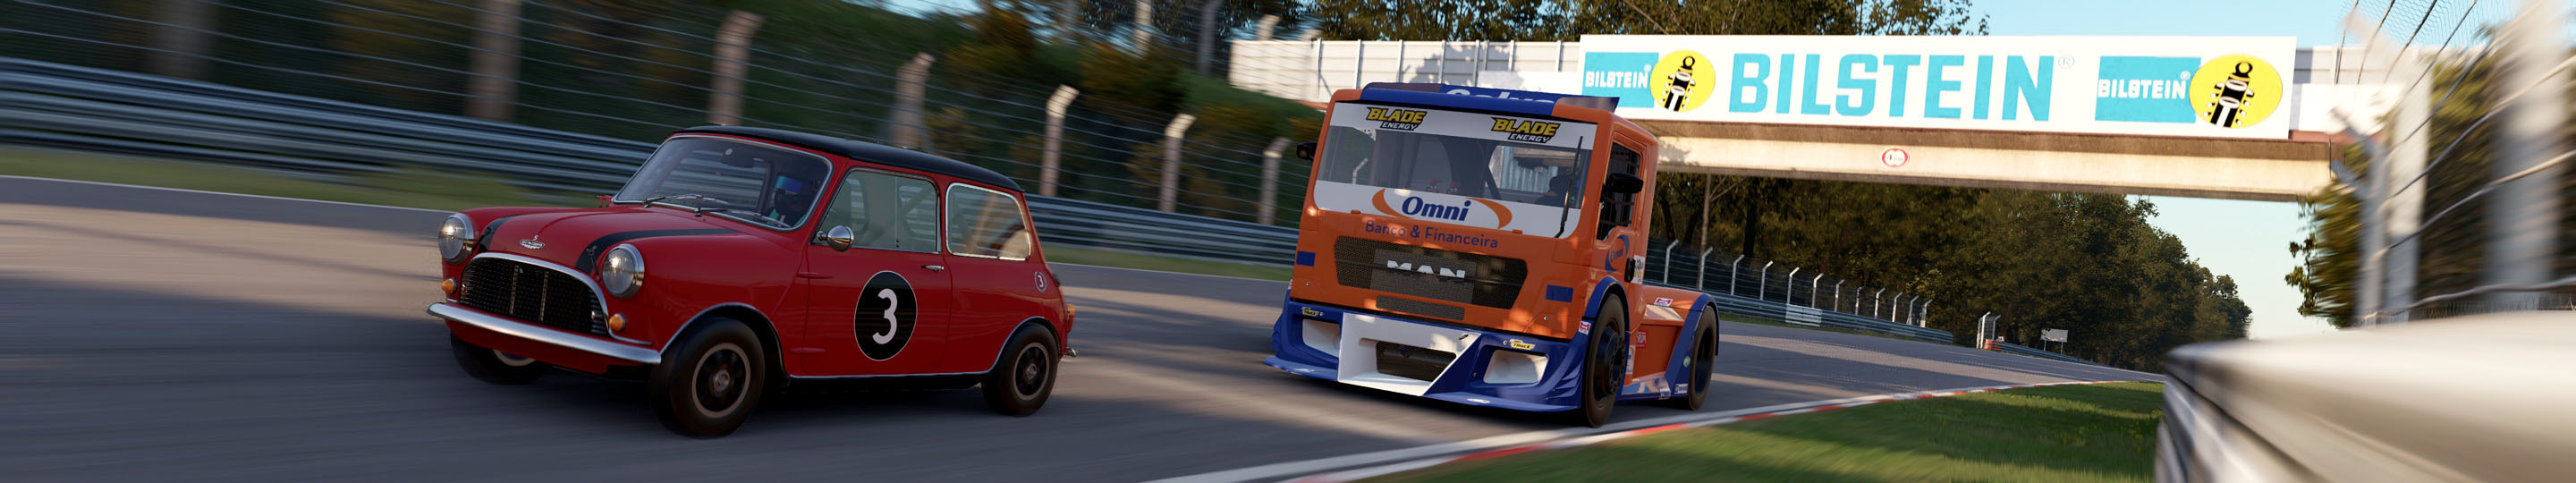 4 AMS2 NORDSCHLEIFE COPA TRUCK and MINI copy.jpg